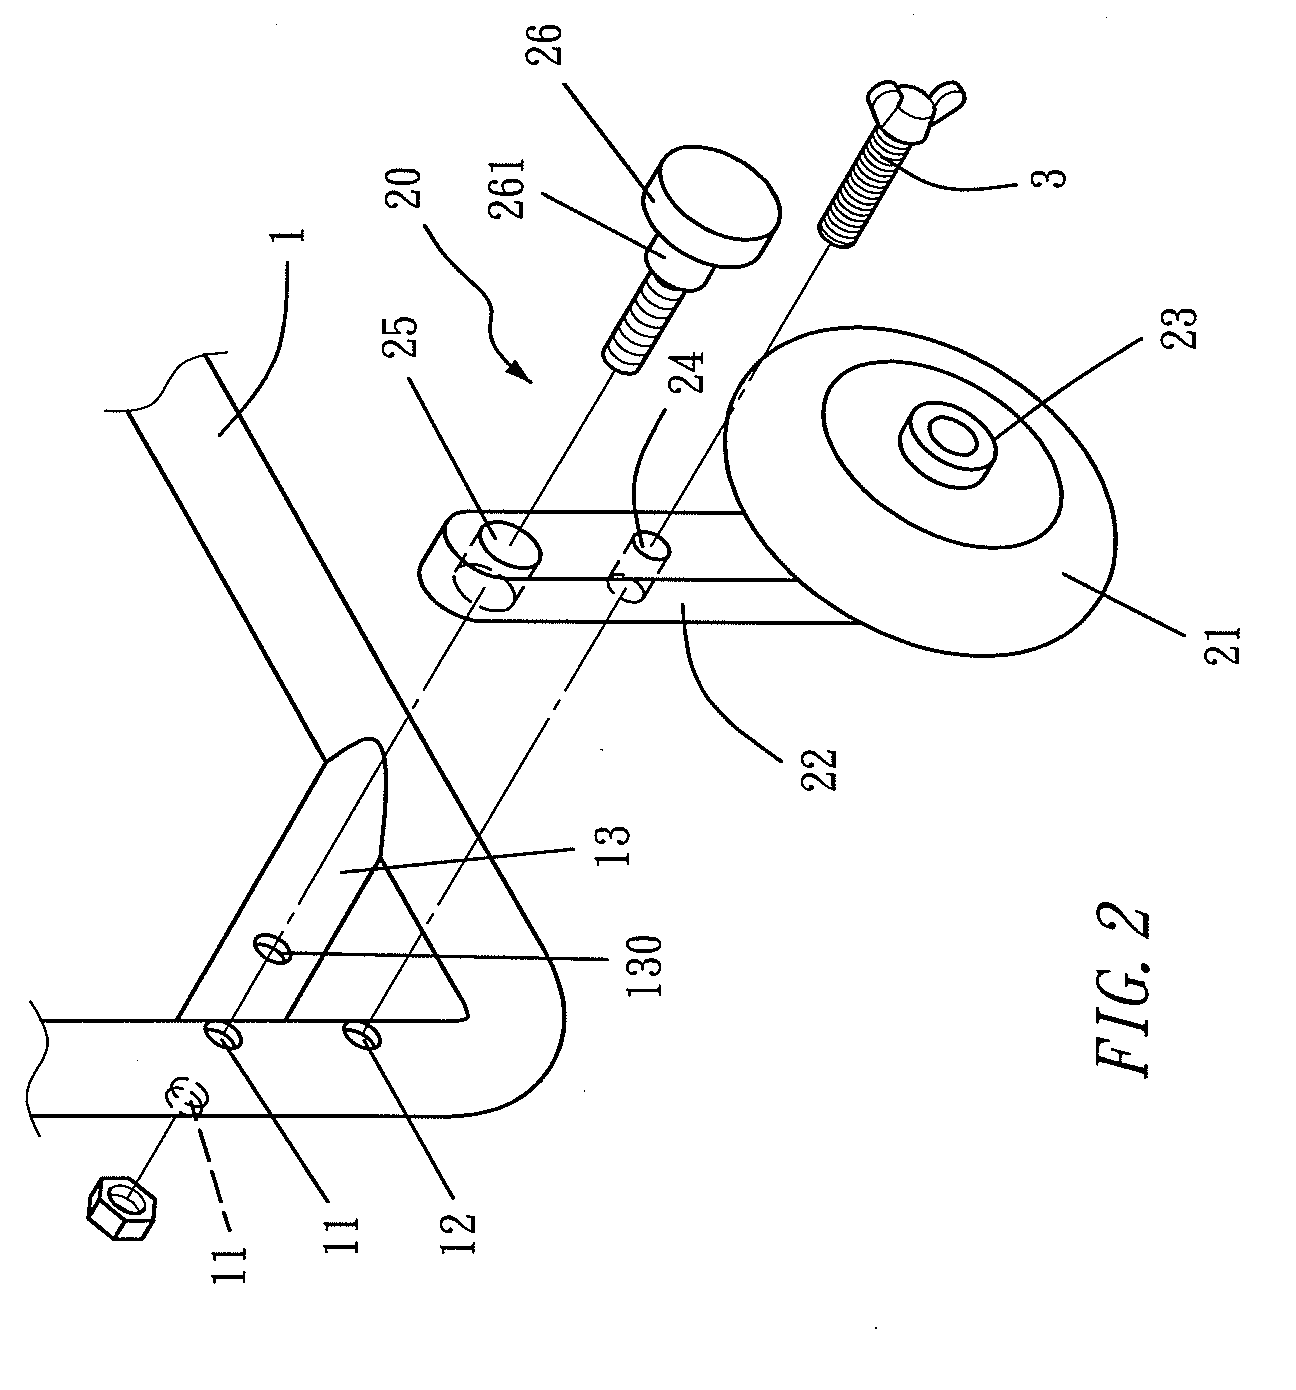 Roller Apparatus For Generator, Pump and The Like